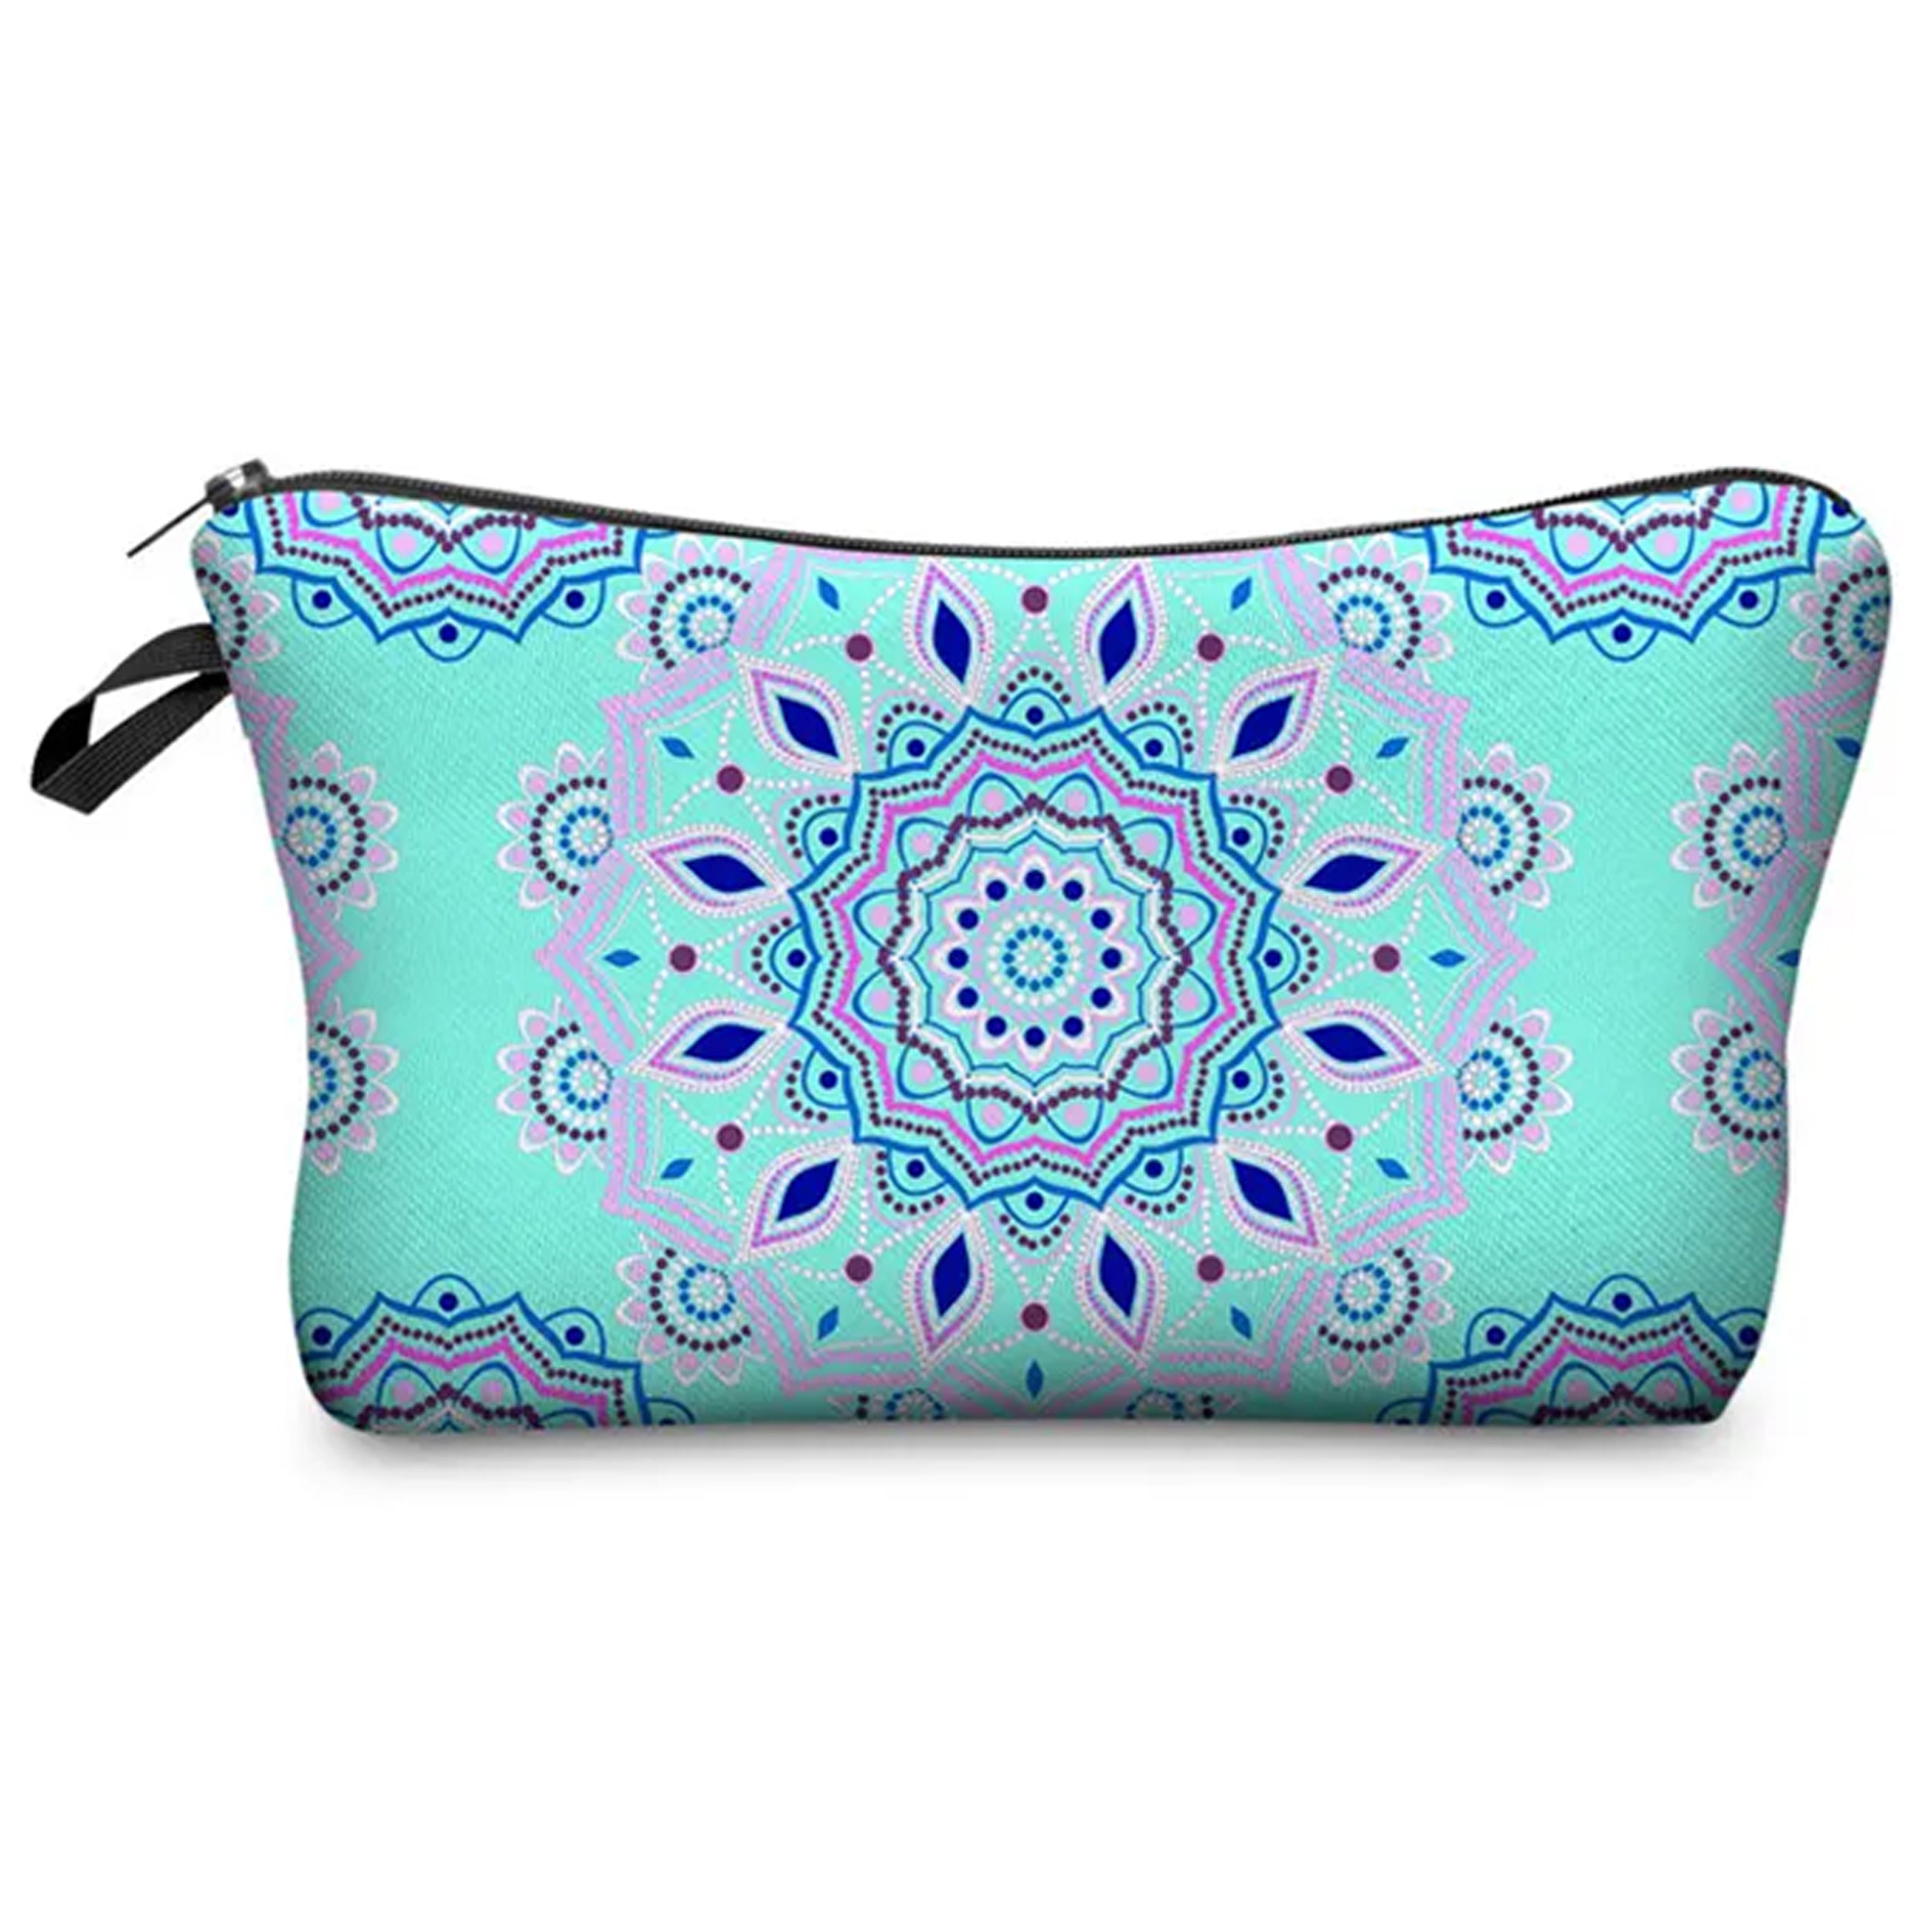 Travel in Style with Vintage Flower Patterned Large Capacity Polyester Makeup Bags for Girls & Women